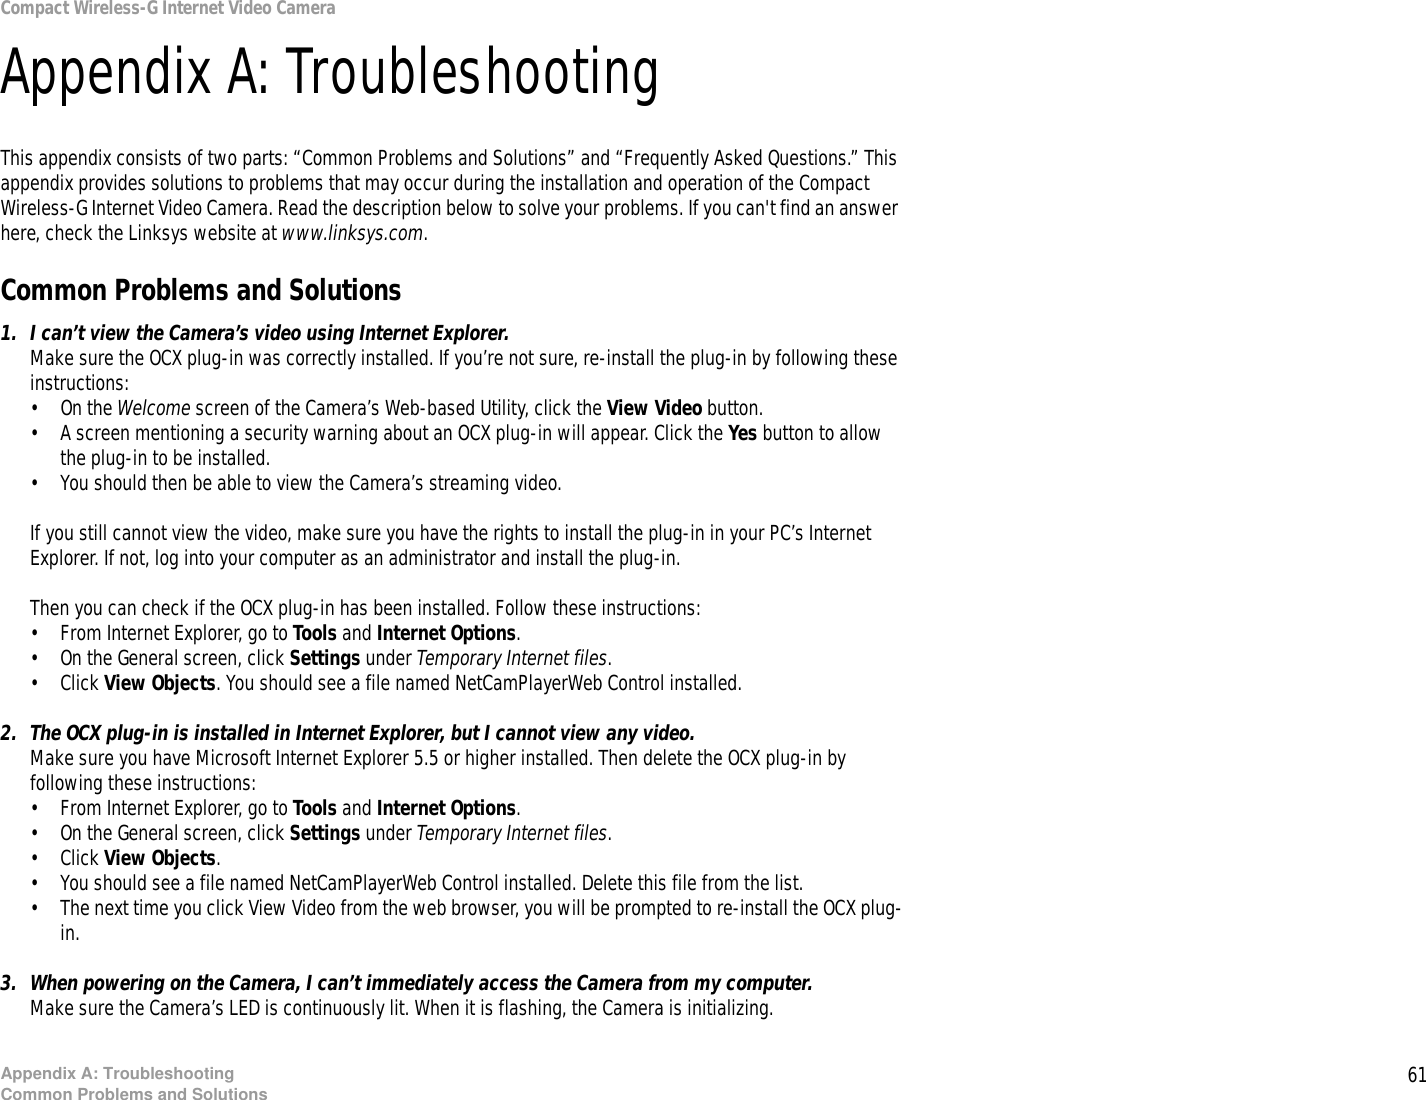 61Appendix A: TroubleshootingCommon Problems and SolutionsCompact Wireless-G Internet Video CameraAppendix A: TroubleshootingThis appendix consists of two parts: “Common Problems and Solutions” and “Frequently Asked Questions.” This appendix provides solutions to problems that may occur during the installation and operation of the Compact Wireless-G Internet Video Camera. Read the description below to solve your problems. If you can&apos;t find an answer here, check the Linksys website at www.linksys.com.Common Problems and Solutions1. I can’t view the Camera’s video using Internet Explorer.Make sure the OCX plug-in was correctly installed. If you’re not sure, re-install the plug-in by following these instructions:• On the Welcome screen of the Camera’s Web-based Utility, click the View Video button.• A screen mentioning a security warning about an OCX plug-in will appear. Click the Yes button to allow the plug-in to be installed.• You should then be able to view the Camera’s streaming video.If you still cannot view the video, make sure you have the rights to install the plug-in in your PC’s Internet Explorer. If not, log into your computer as an administrator and install the plug-in.Then you can check if the OCX plug-in has been installed. Follow these instructions:• From Internet Explorer, go to Tools and Internet Options.• On the General screen, click Settings under Temporary Internet files.• Click View Objects. You should see a file named NetCamPlayerWeb Control installed.2. The OCX plug-in is installed in Internet Explorer, but I cannot view any video.Make sure you have Microsoft Internet Explorer 5.5 or higher installed. Then delete the OCX plug-in by following these instructions:• From Internet Explorer, go to Tools and Internet Options.• On the General screen, click Settings under Temporary Internet files.• Click View Objects. • You should see a file named NetCamPlayerWeb Control installed. Delete this file from the list.• The next time you click View Video from the web browser, you will be prompted to re-install the OCX plug-in.3. When powering on the Camera, I can’t immediately access the Camera from my computer.Make sure the Camera’s LED is continuously lit. When it is flashing, the Camera is initializing.